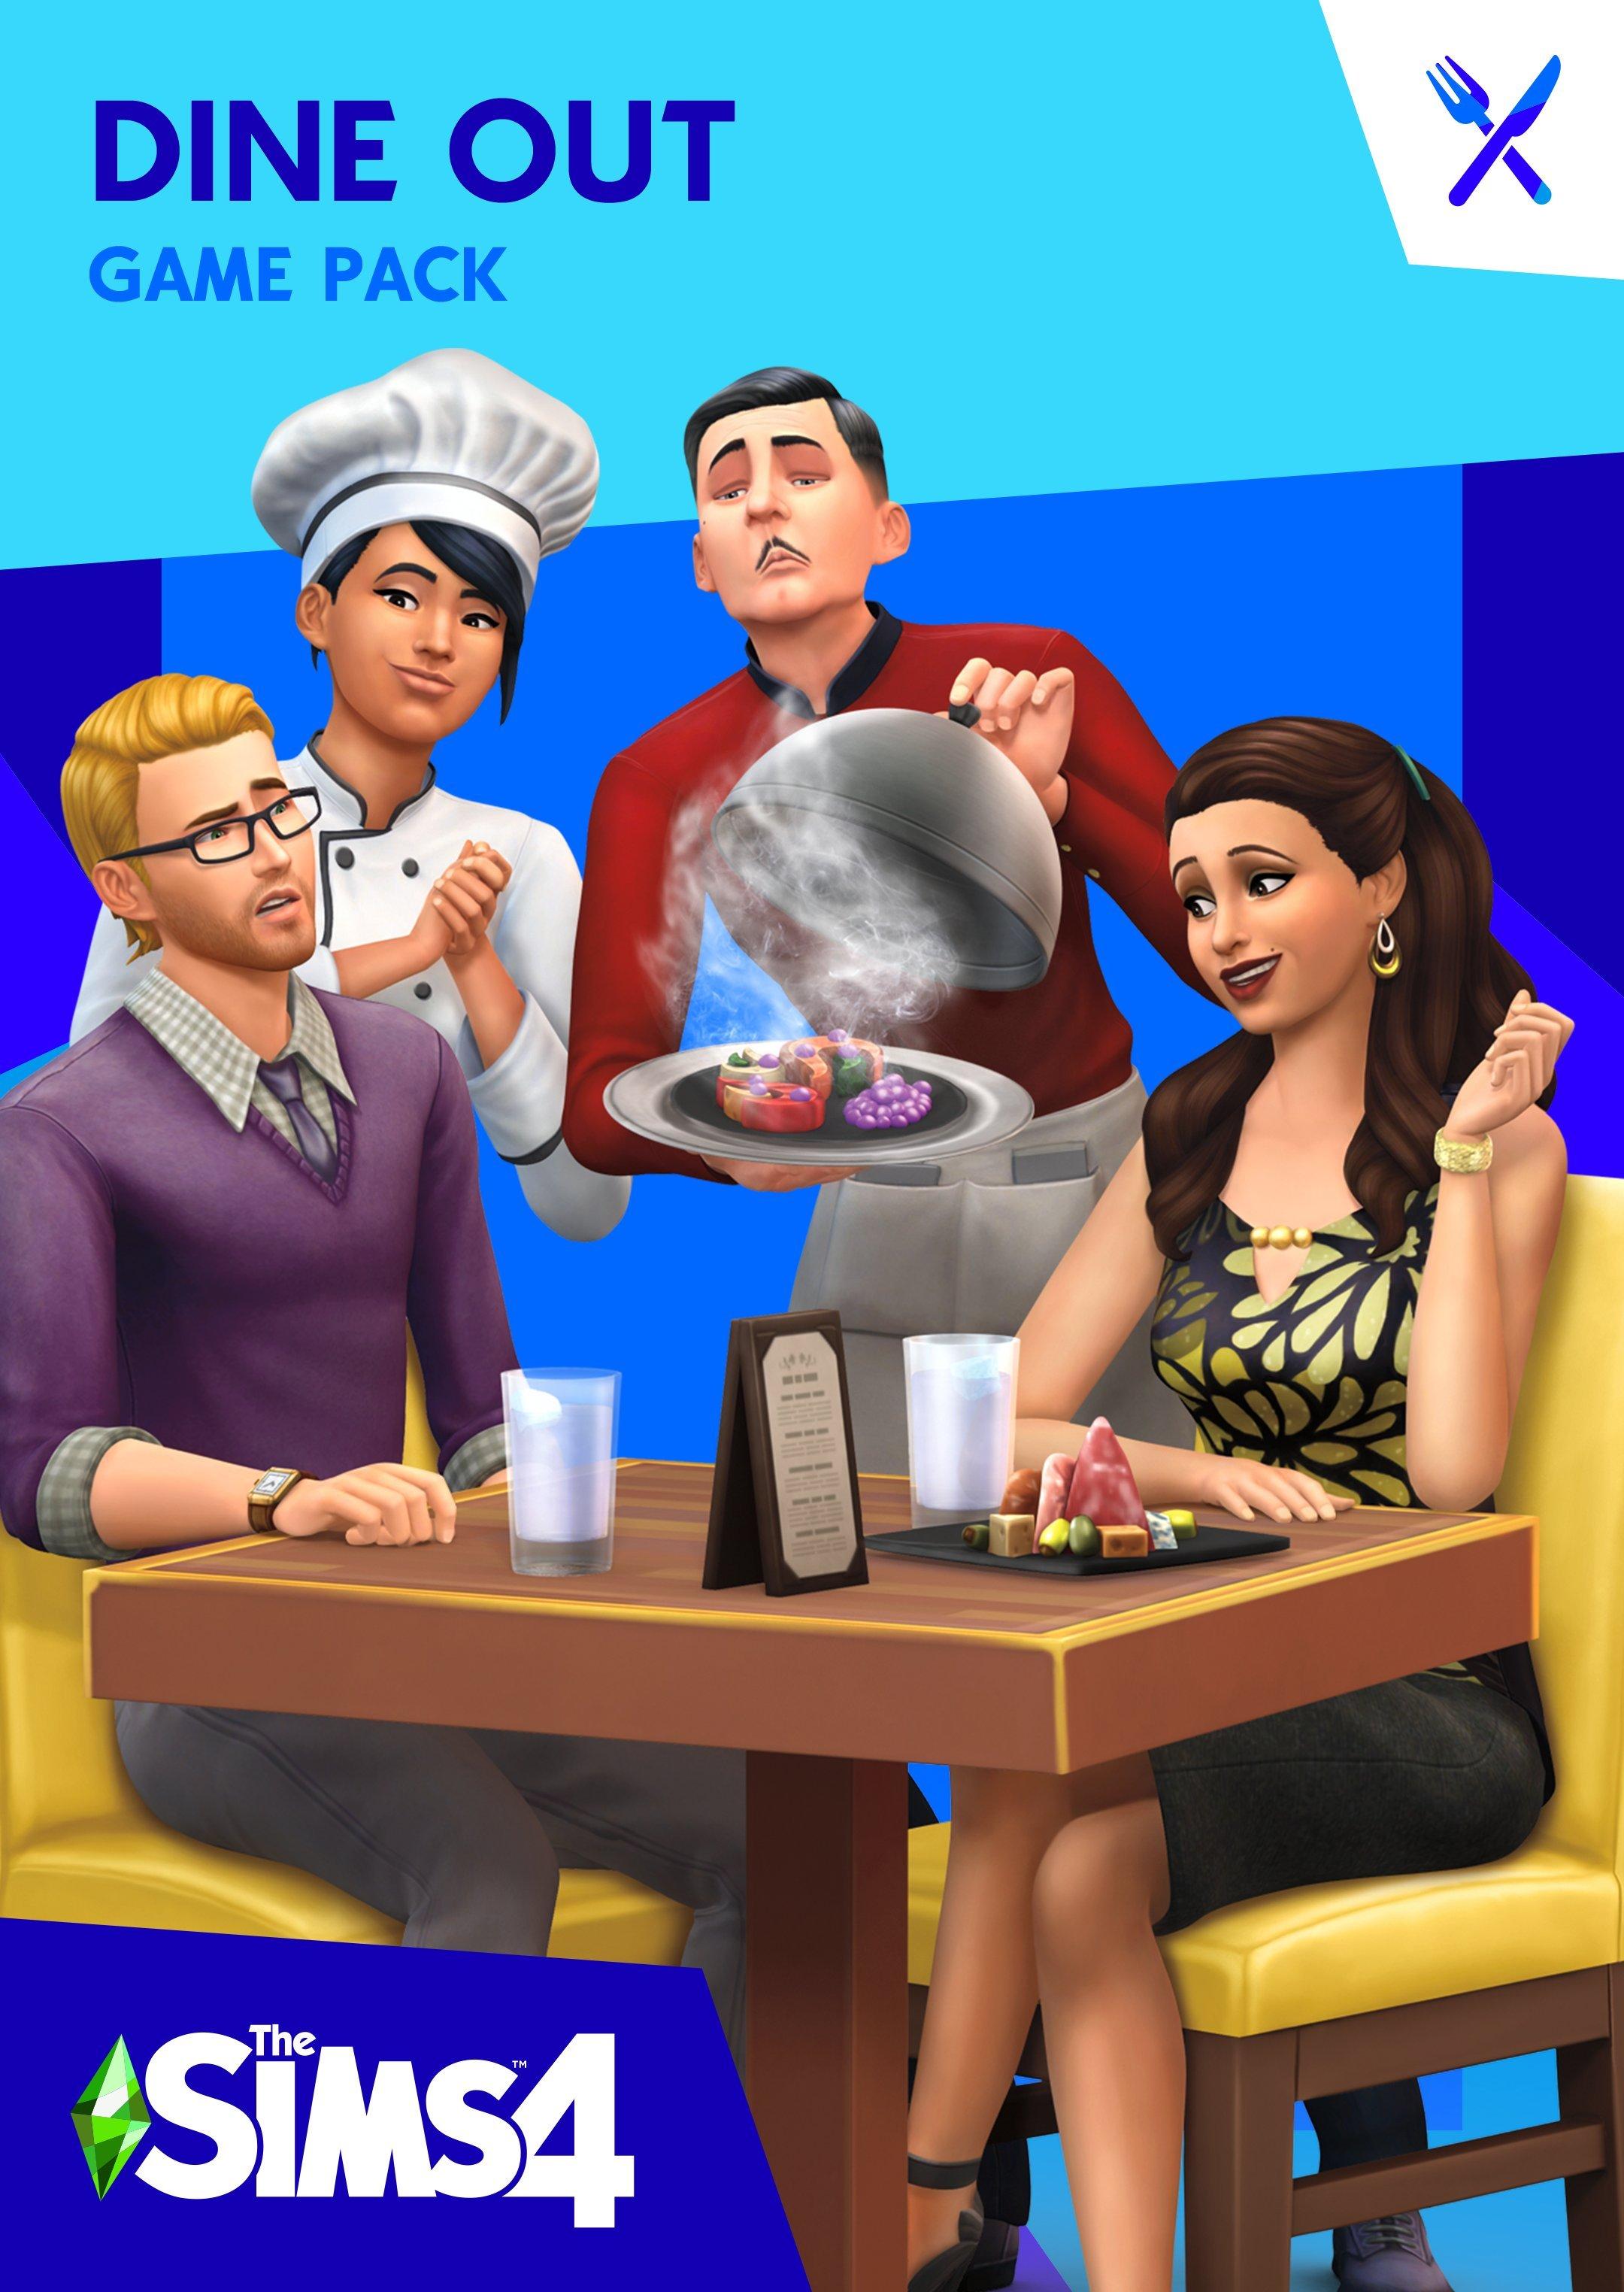 The Sims 4: Dine Out Pack DLC - PC EA app